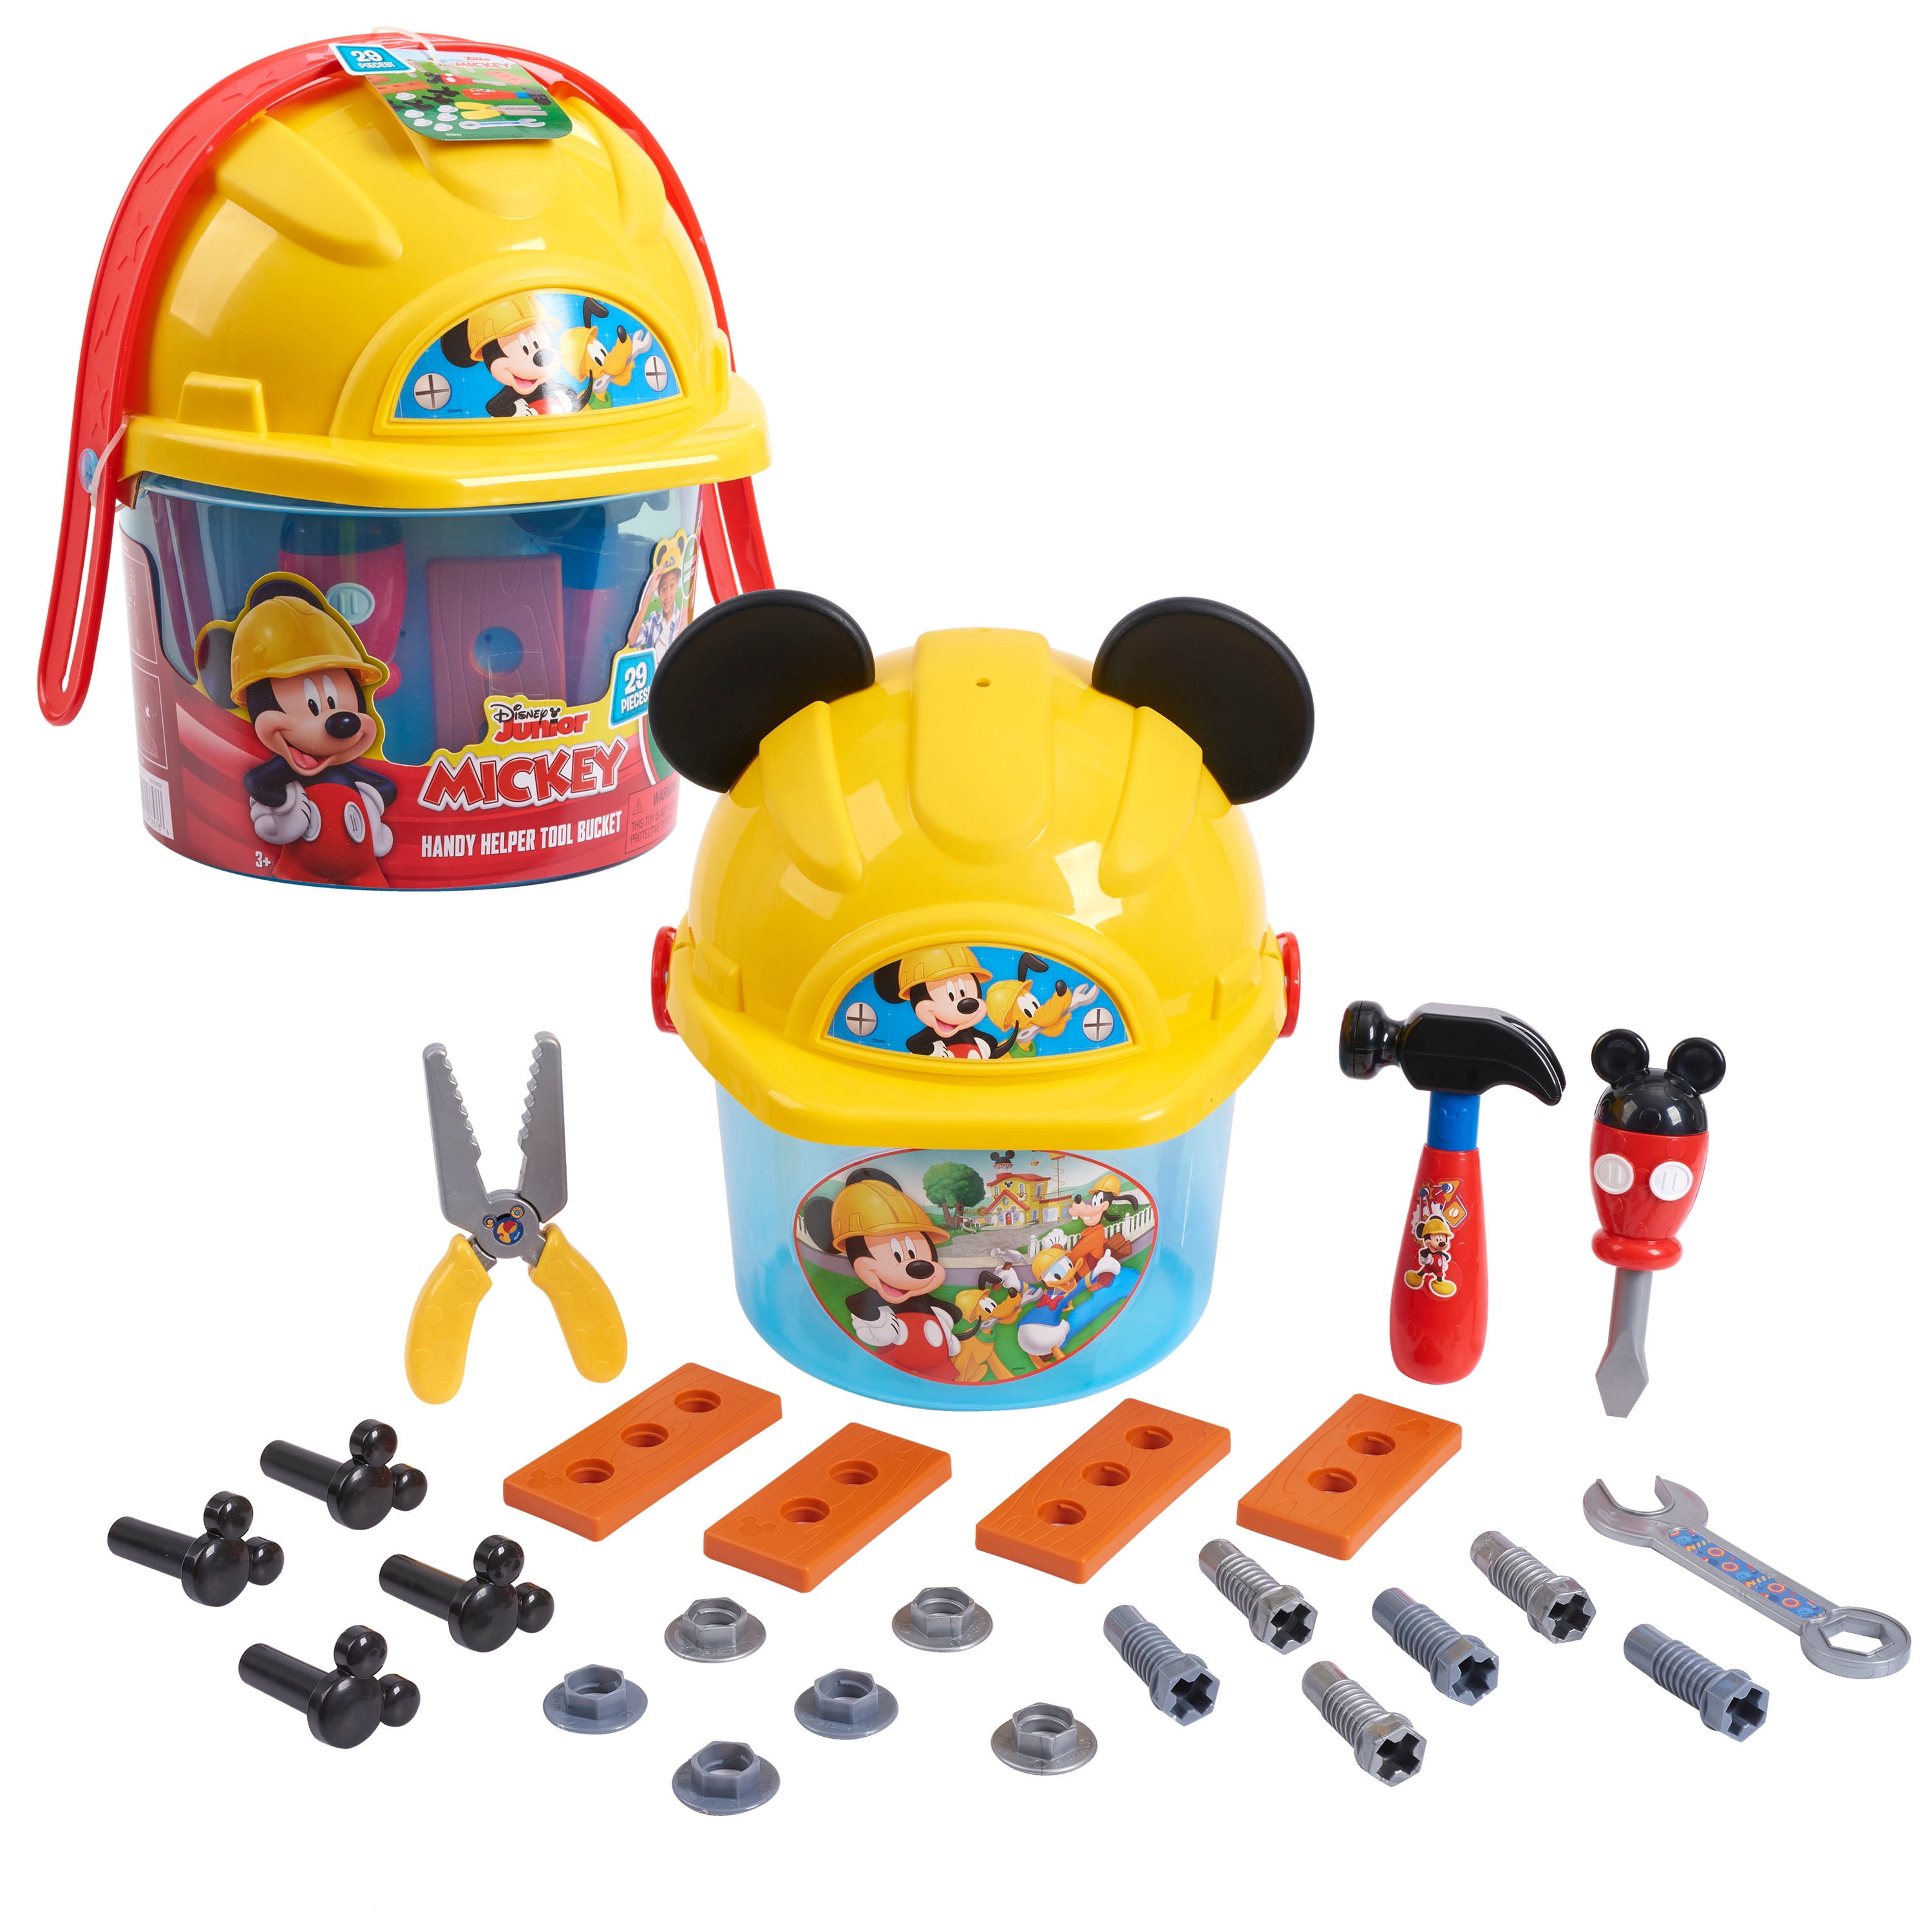 Disney Junior Mickey Mouse Handy Helper Tool Bucket, 25-pieces, Officially Licensed Kids Toys for Ages 3 Up, Gifts and Presents